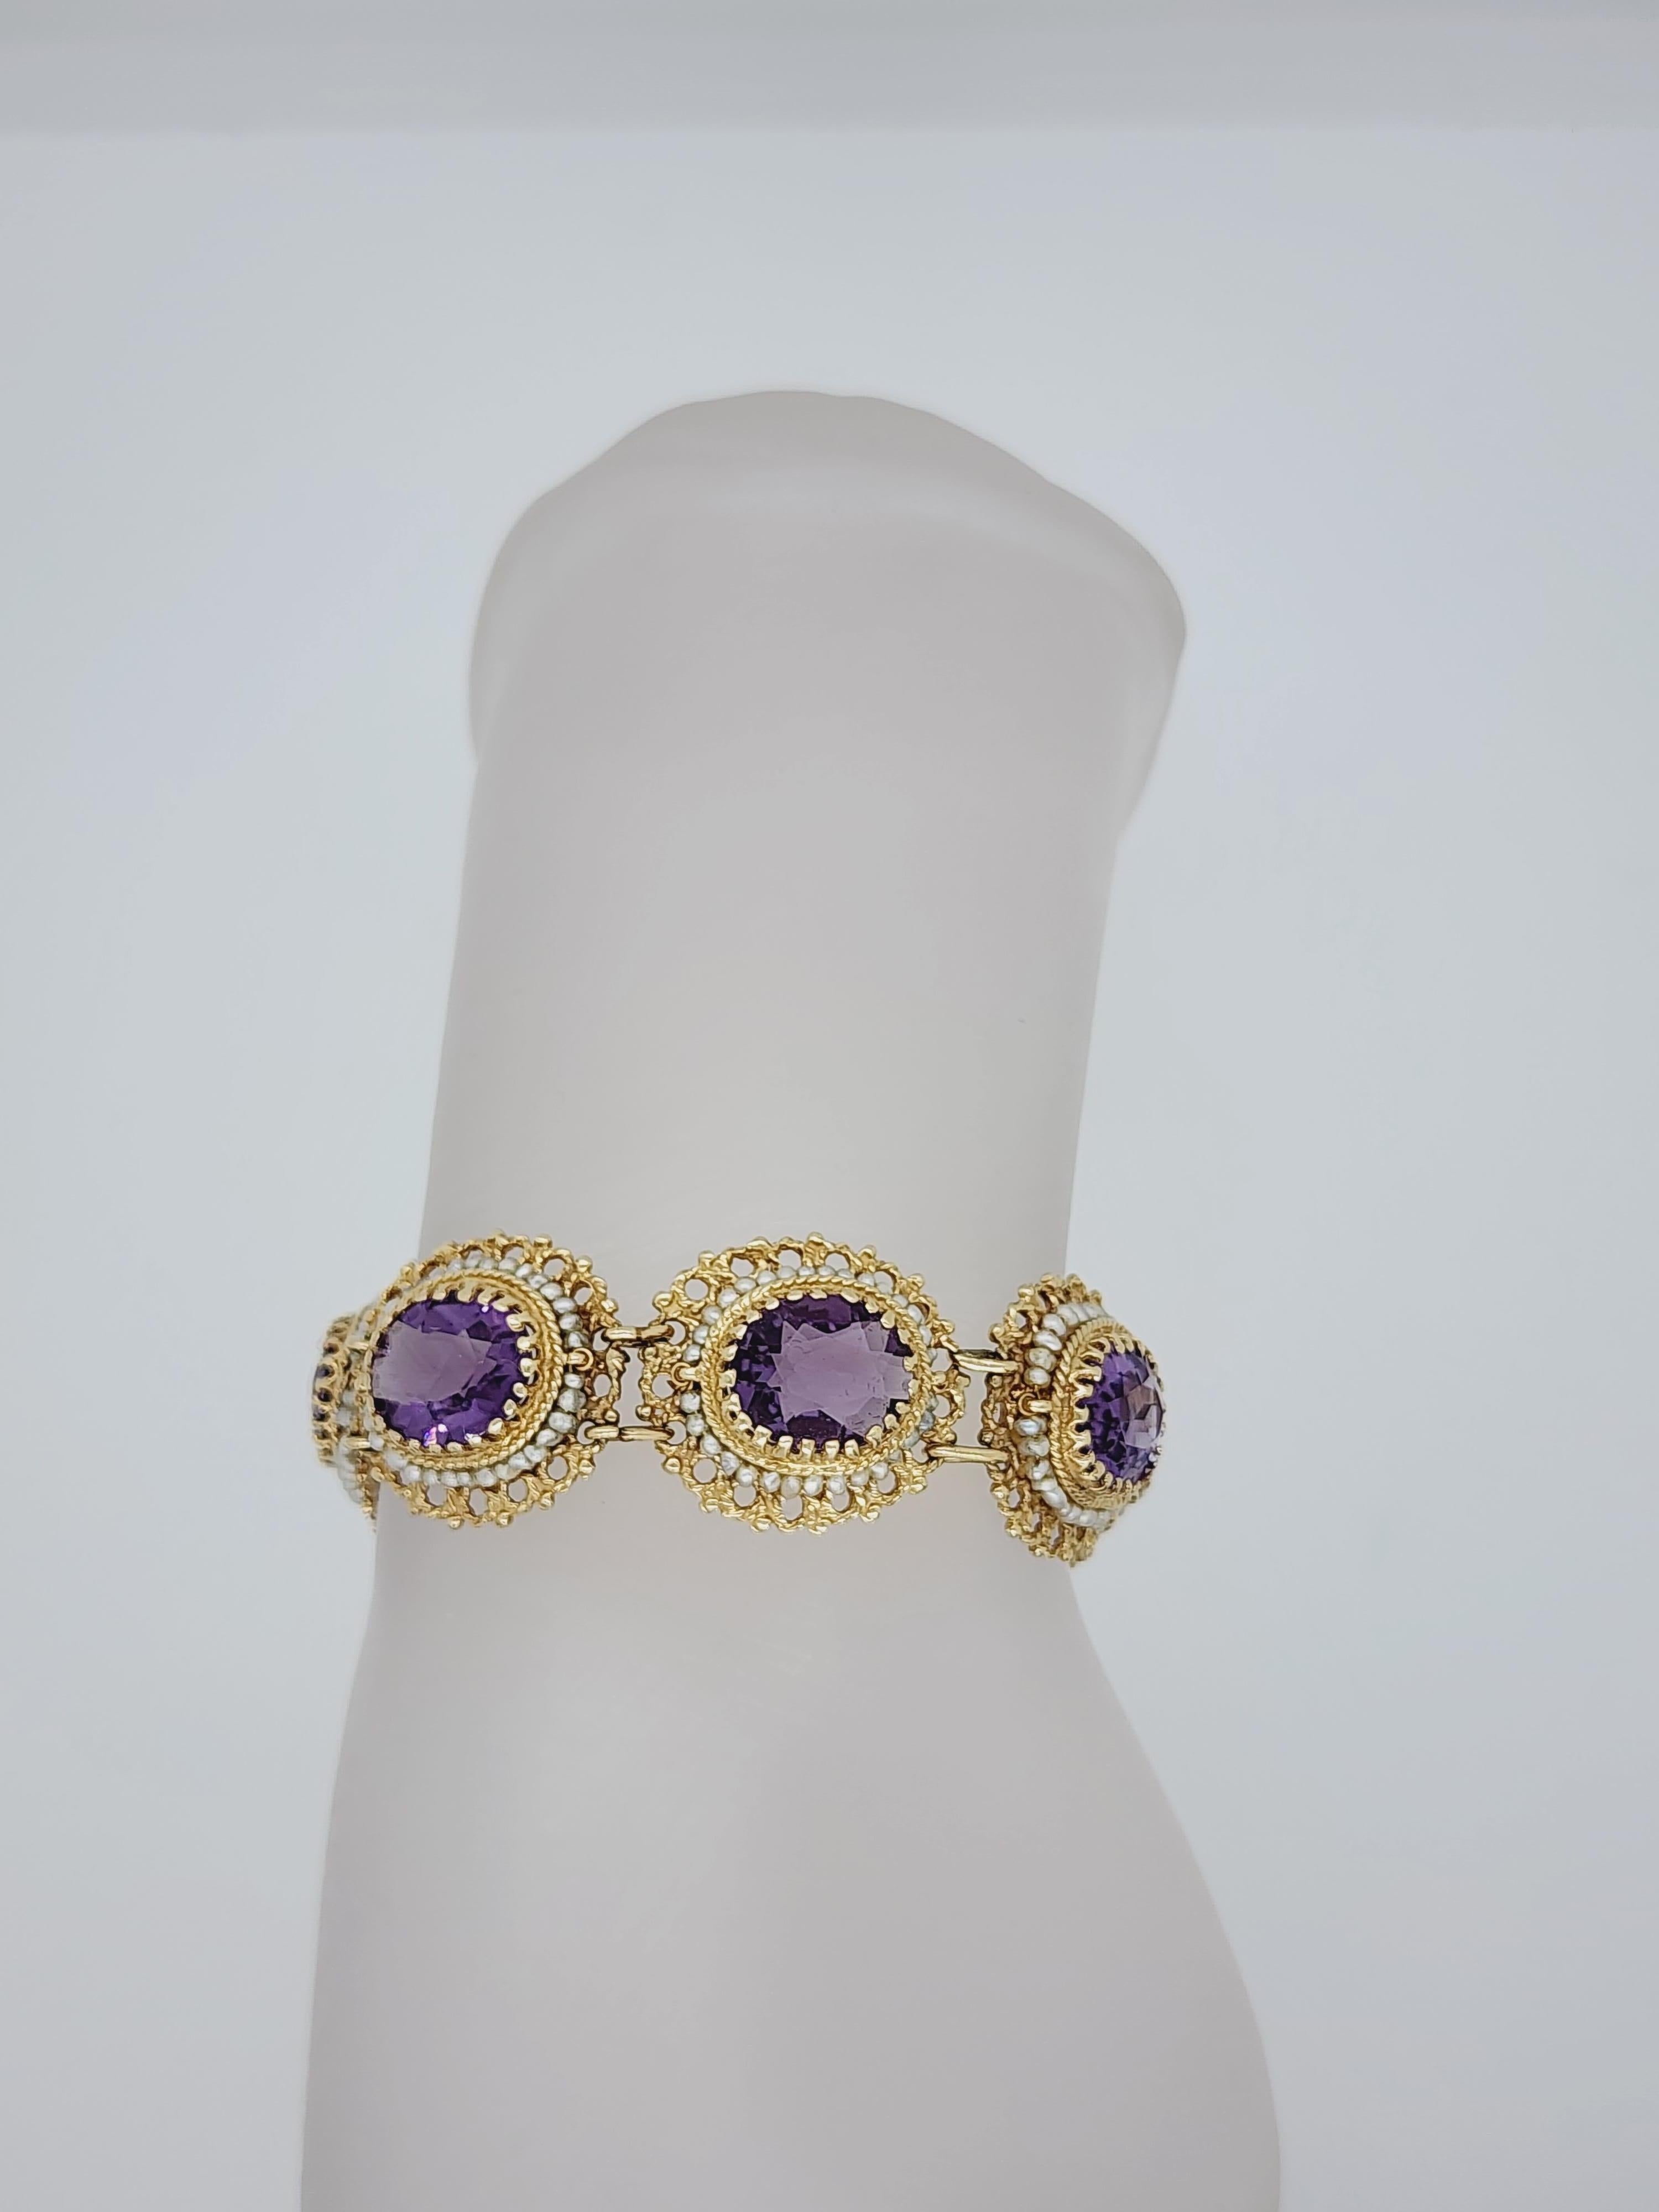 Oval Cut Amethyst and White Pearl Bracelet in 14k Yellow Gold For Sale